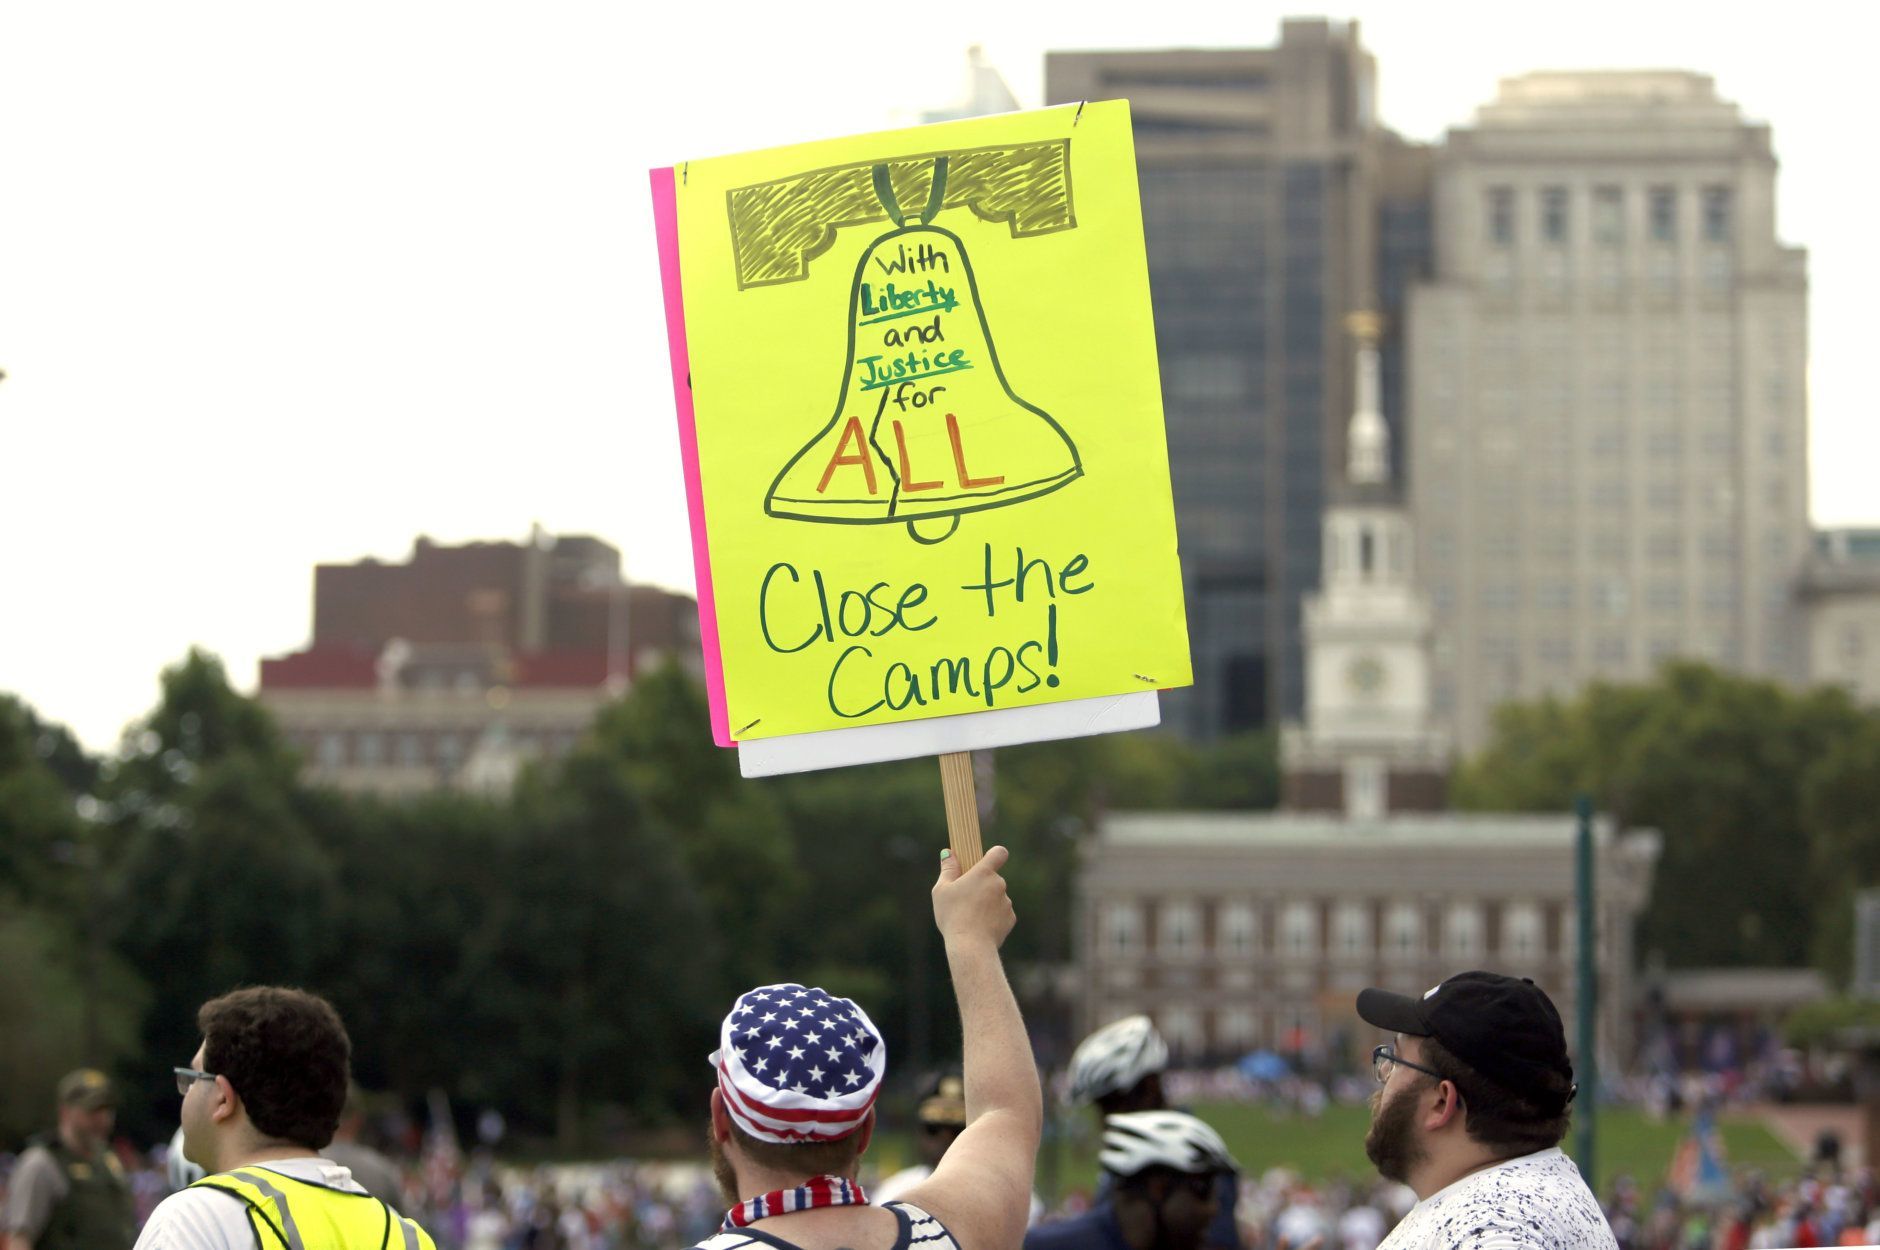 Protestors assembled by a majority Jewish group called "Never Again Is Now" demonstrate near Independence Hall, background, Thursday July 4, 2019, in Philadelphia. Hundreds gathered during the city's traditional Fourth of July parade to protest the treatment of immigrants and asylum seekers. (AP Photo/Jacqueline Larma)